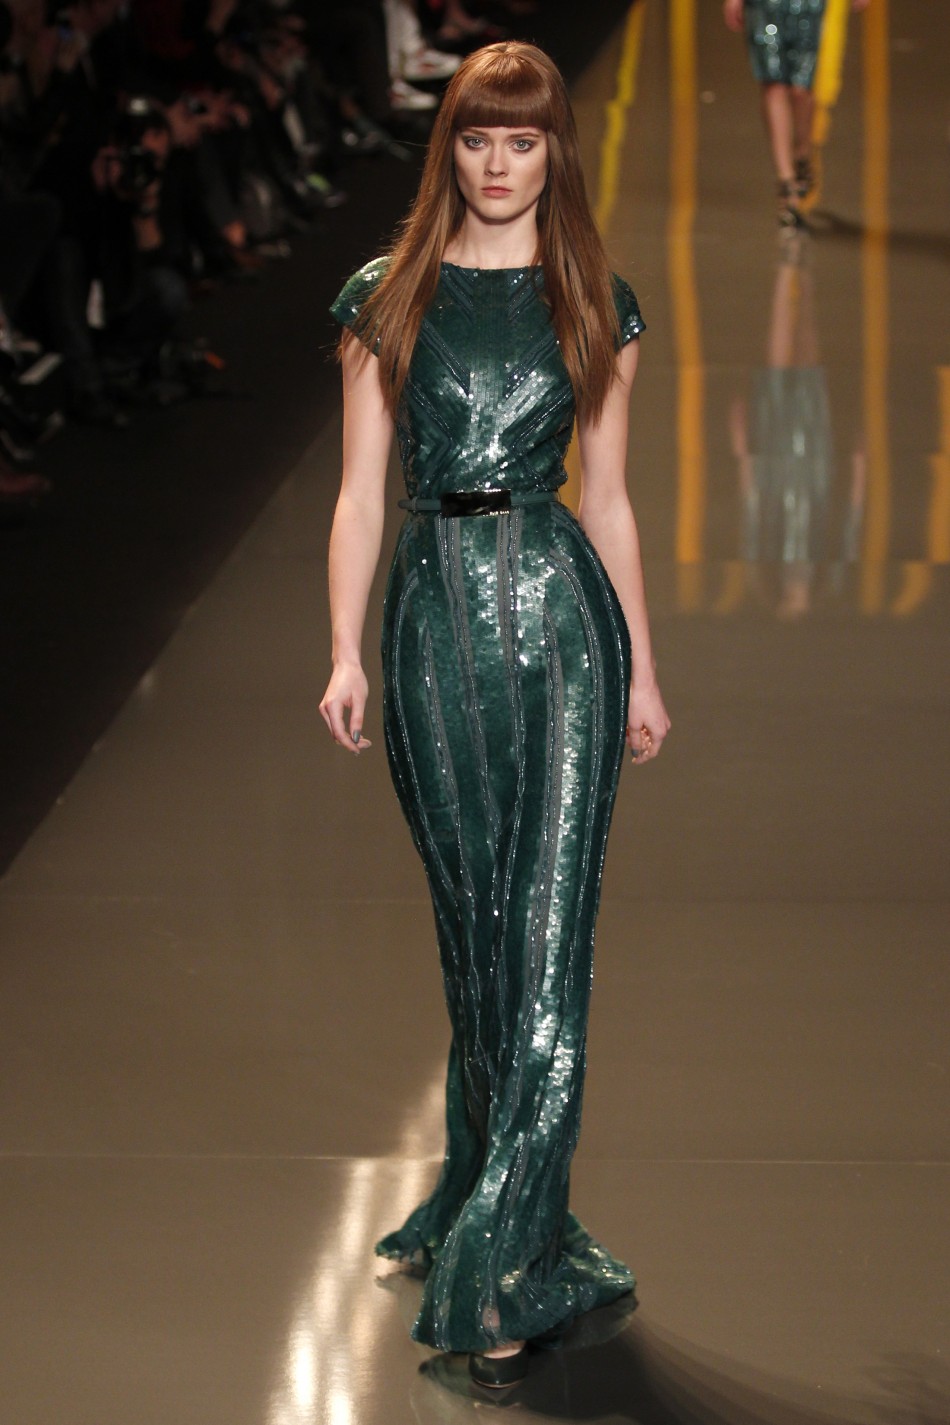 Elie Saabs Ultra Glam and Opulent Red-Carpet Creations at Paris Fashion Week